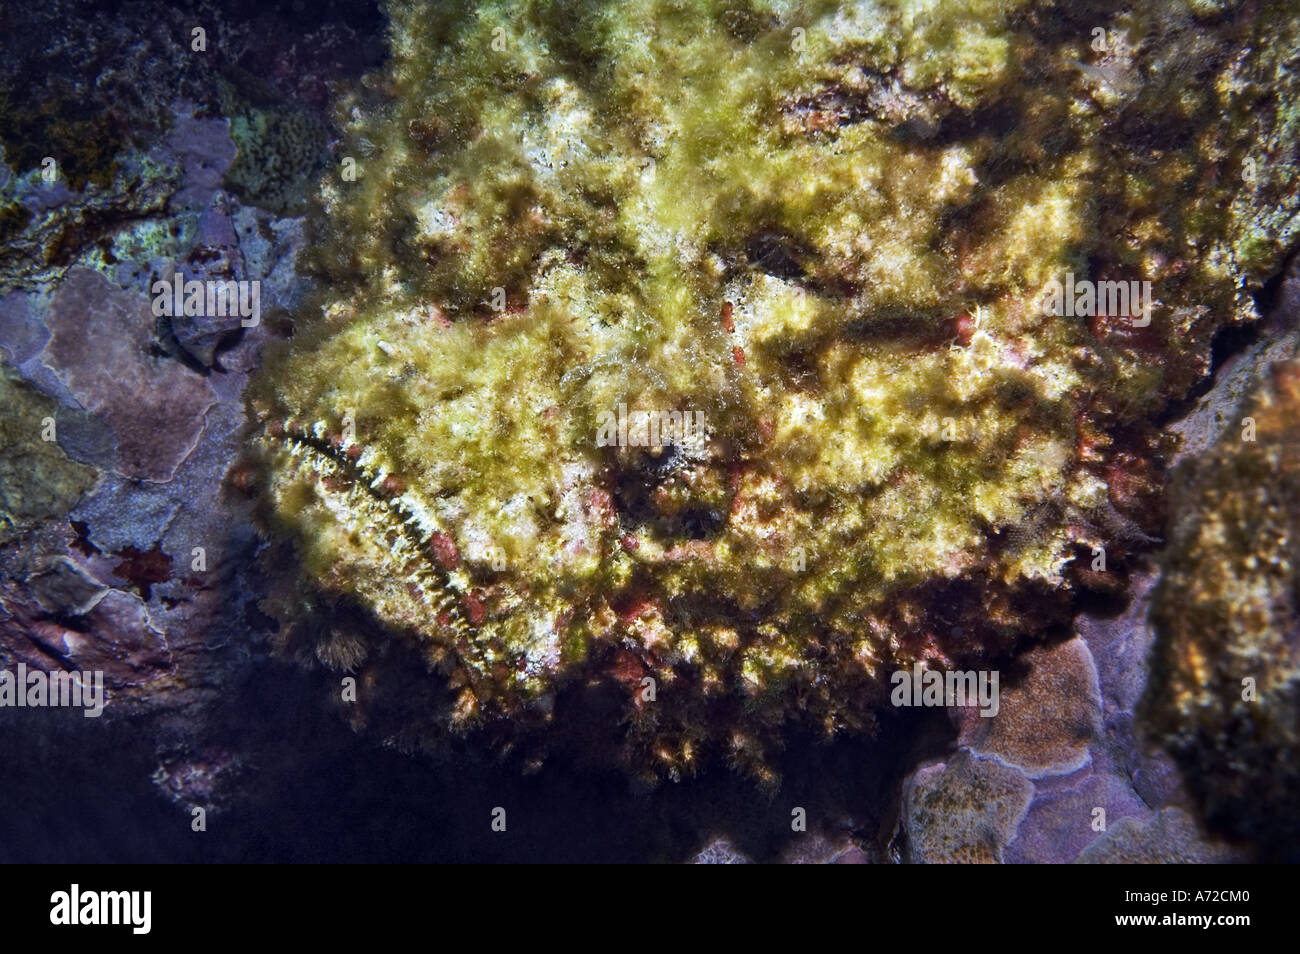 close-up of stonefish covered with seaweed Stock Photo